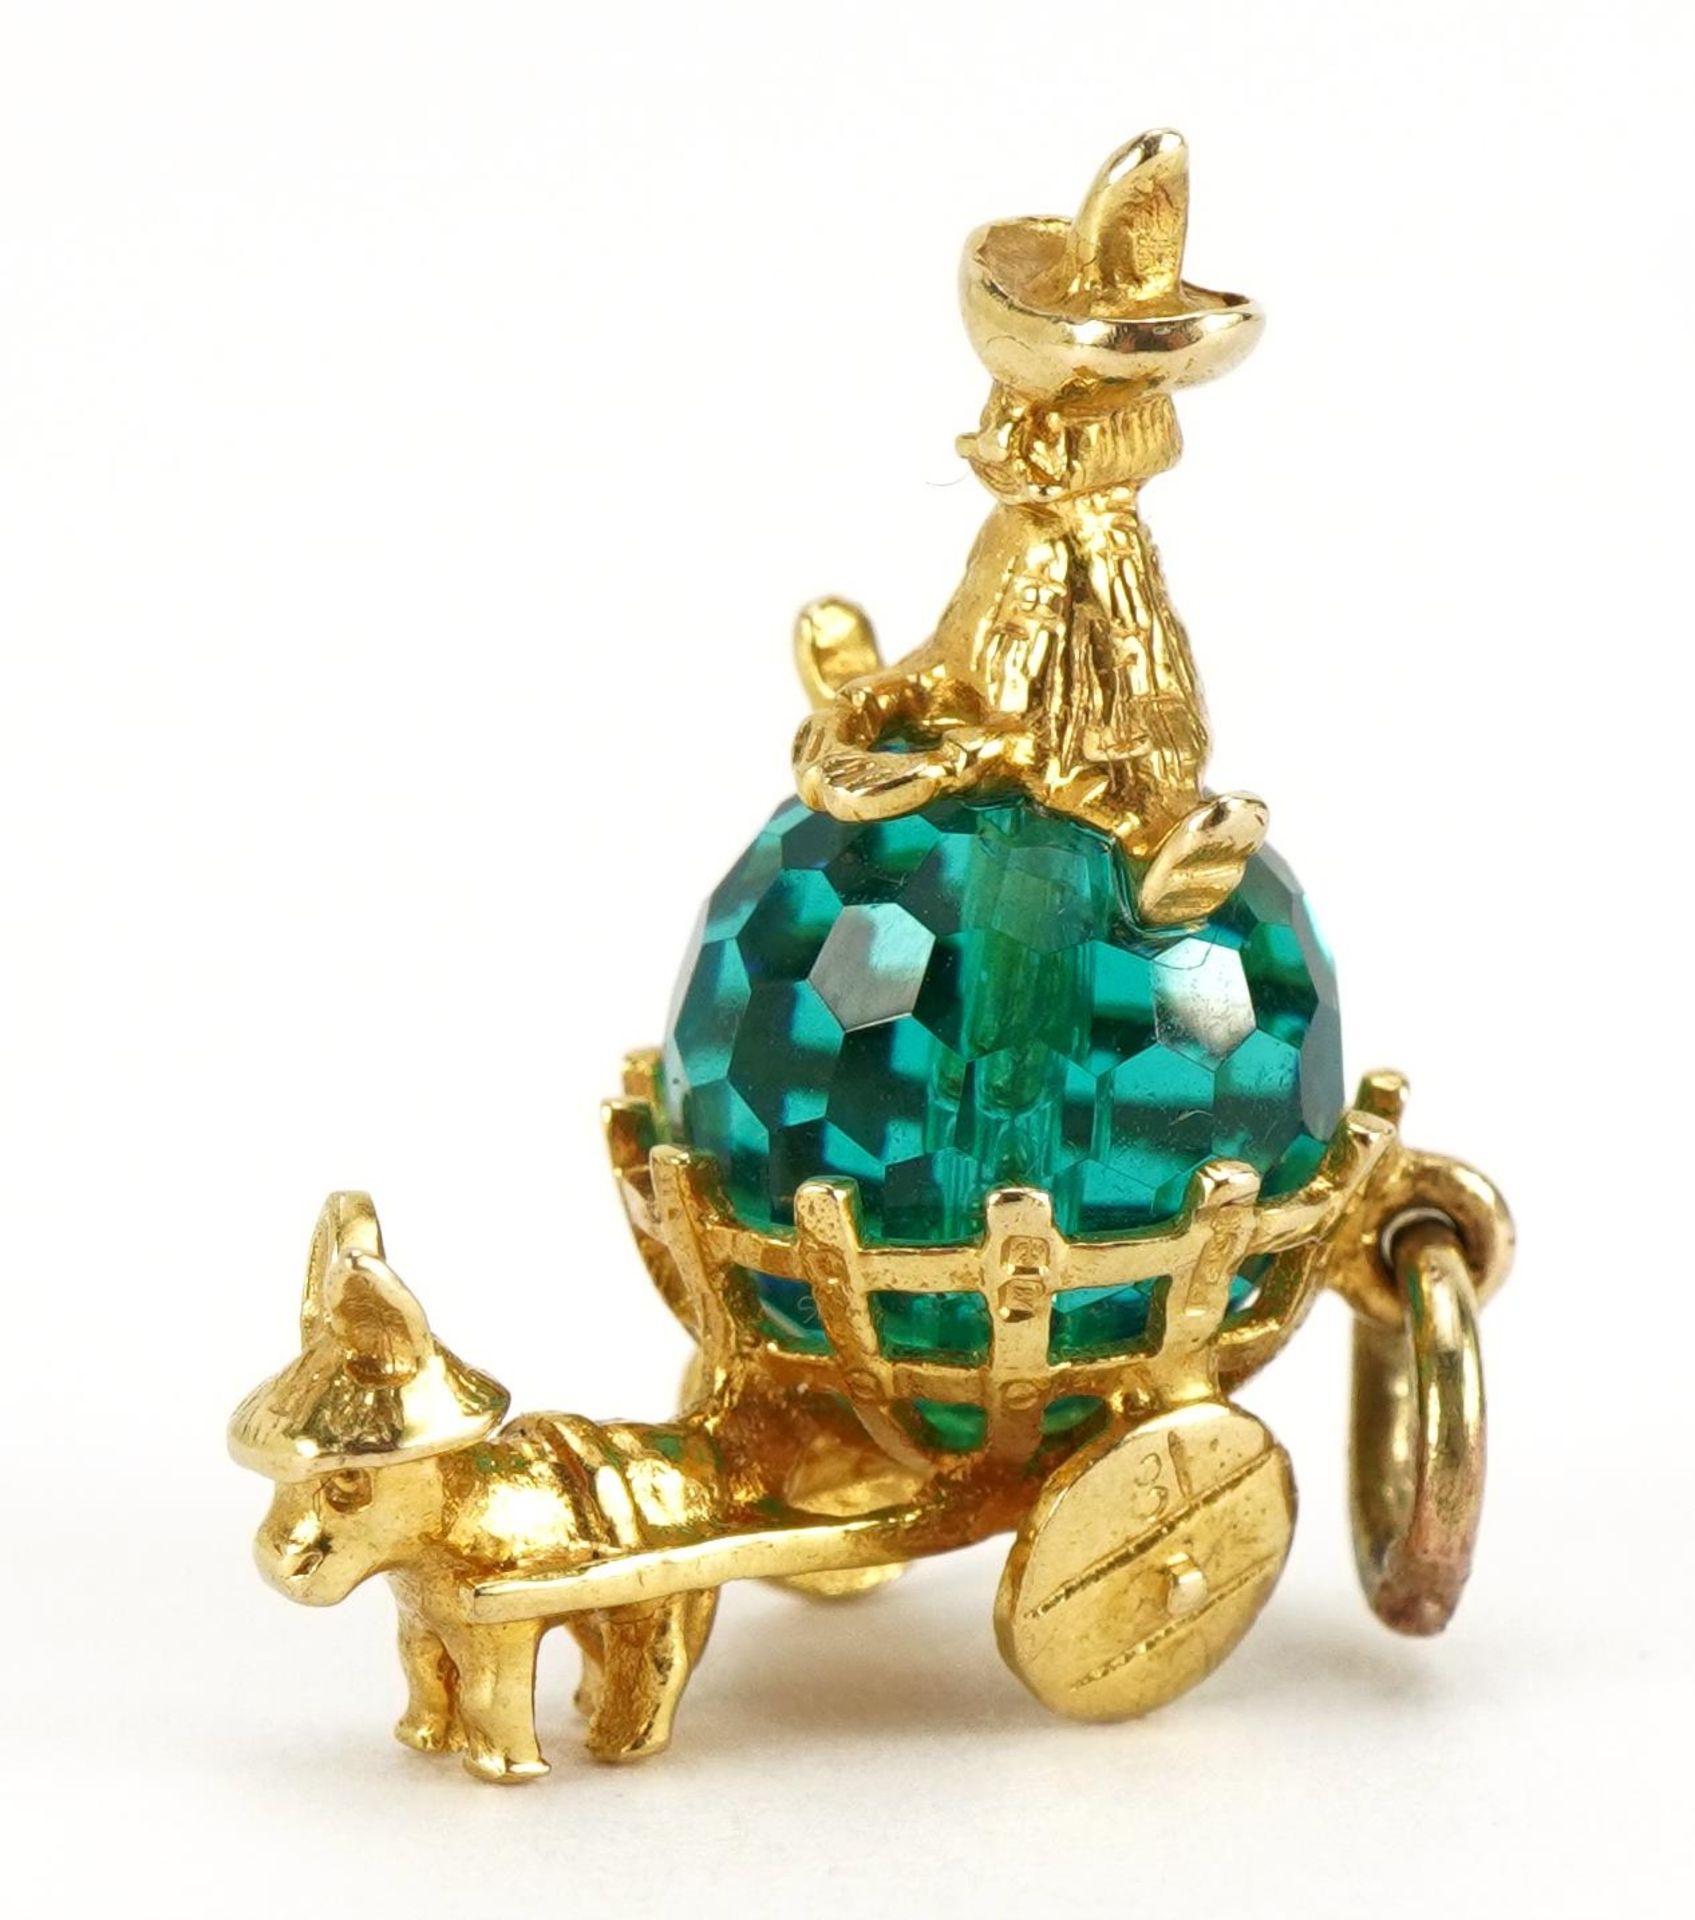 9ct gold horse and cart charm set with a green stone, 2.3cm high, 4.5g